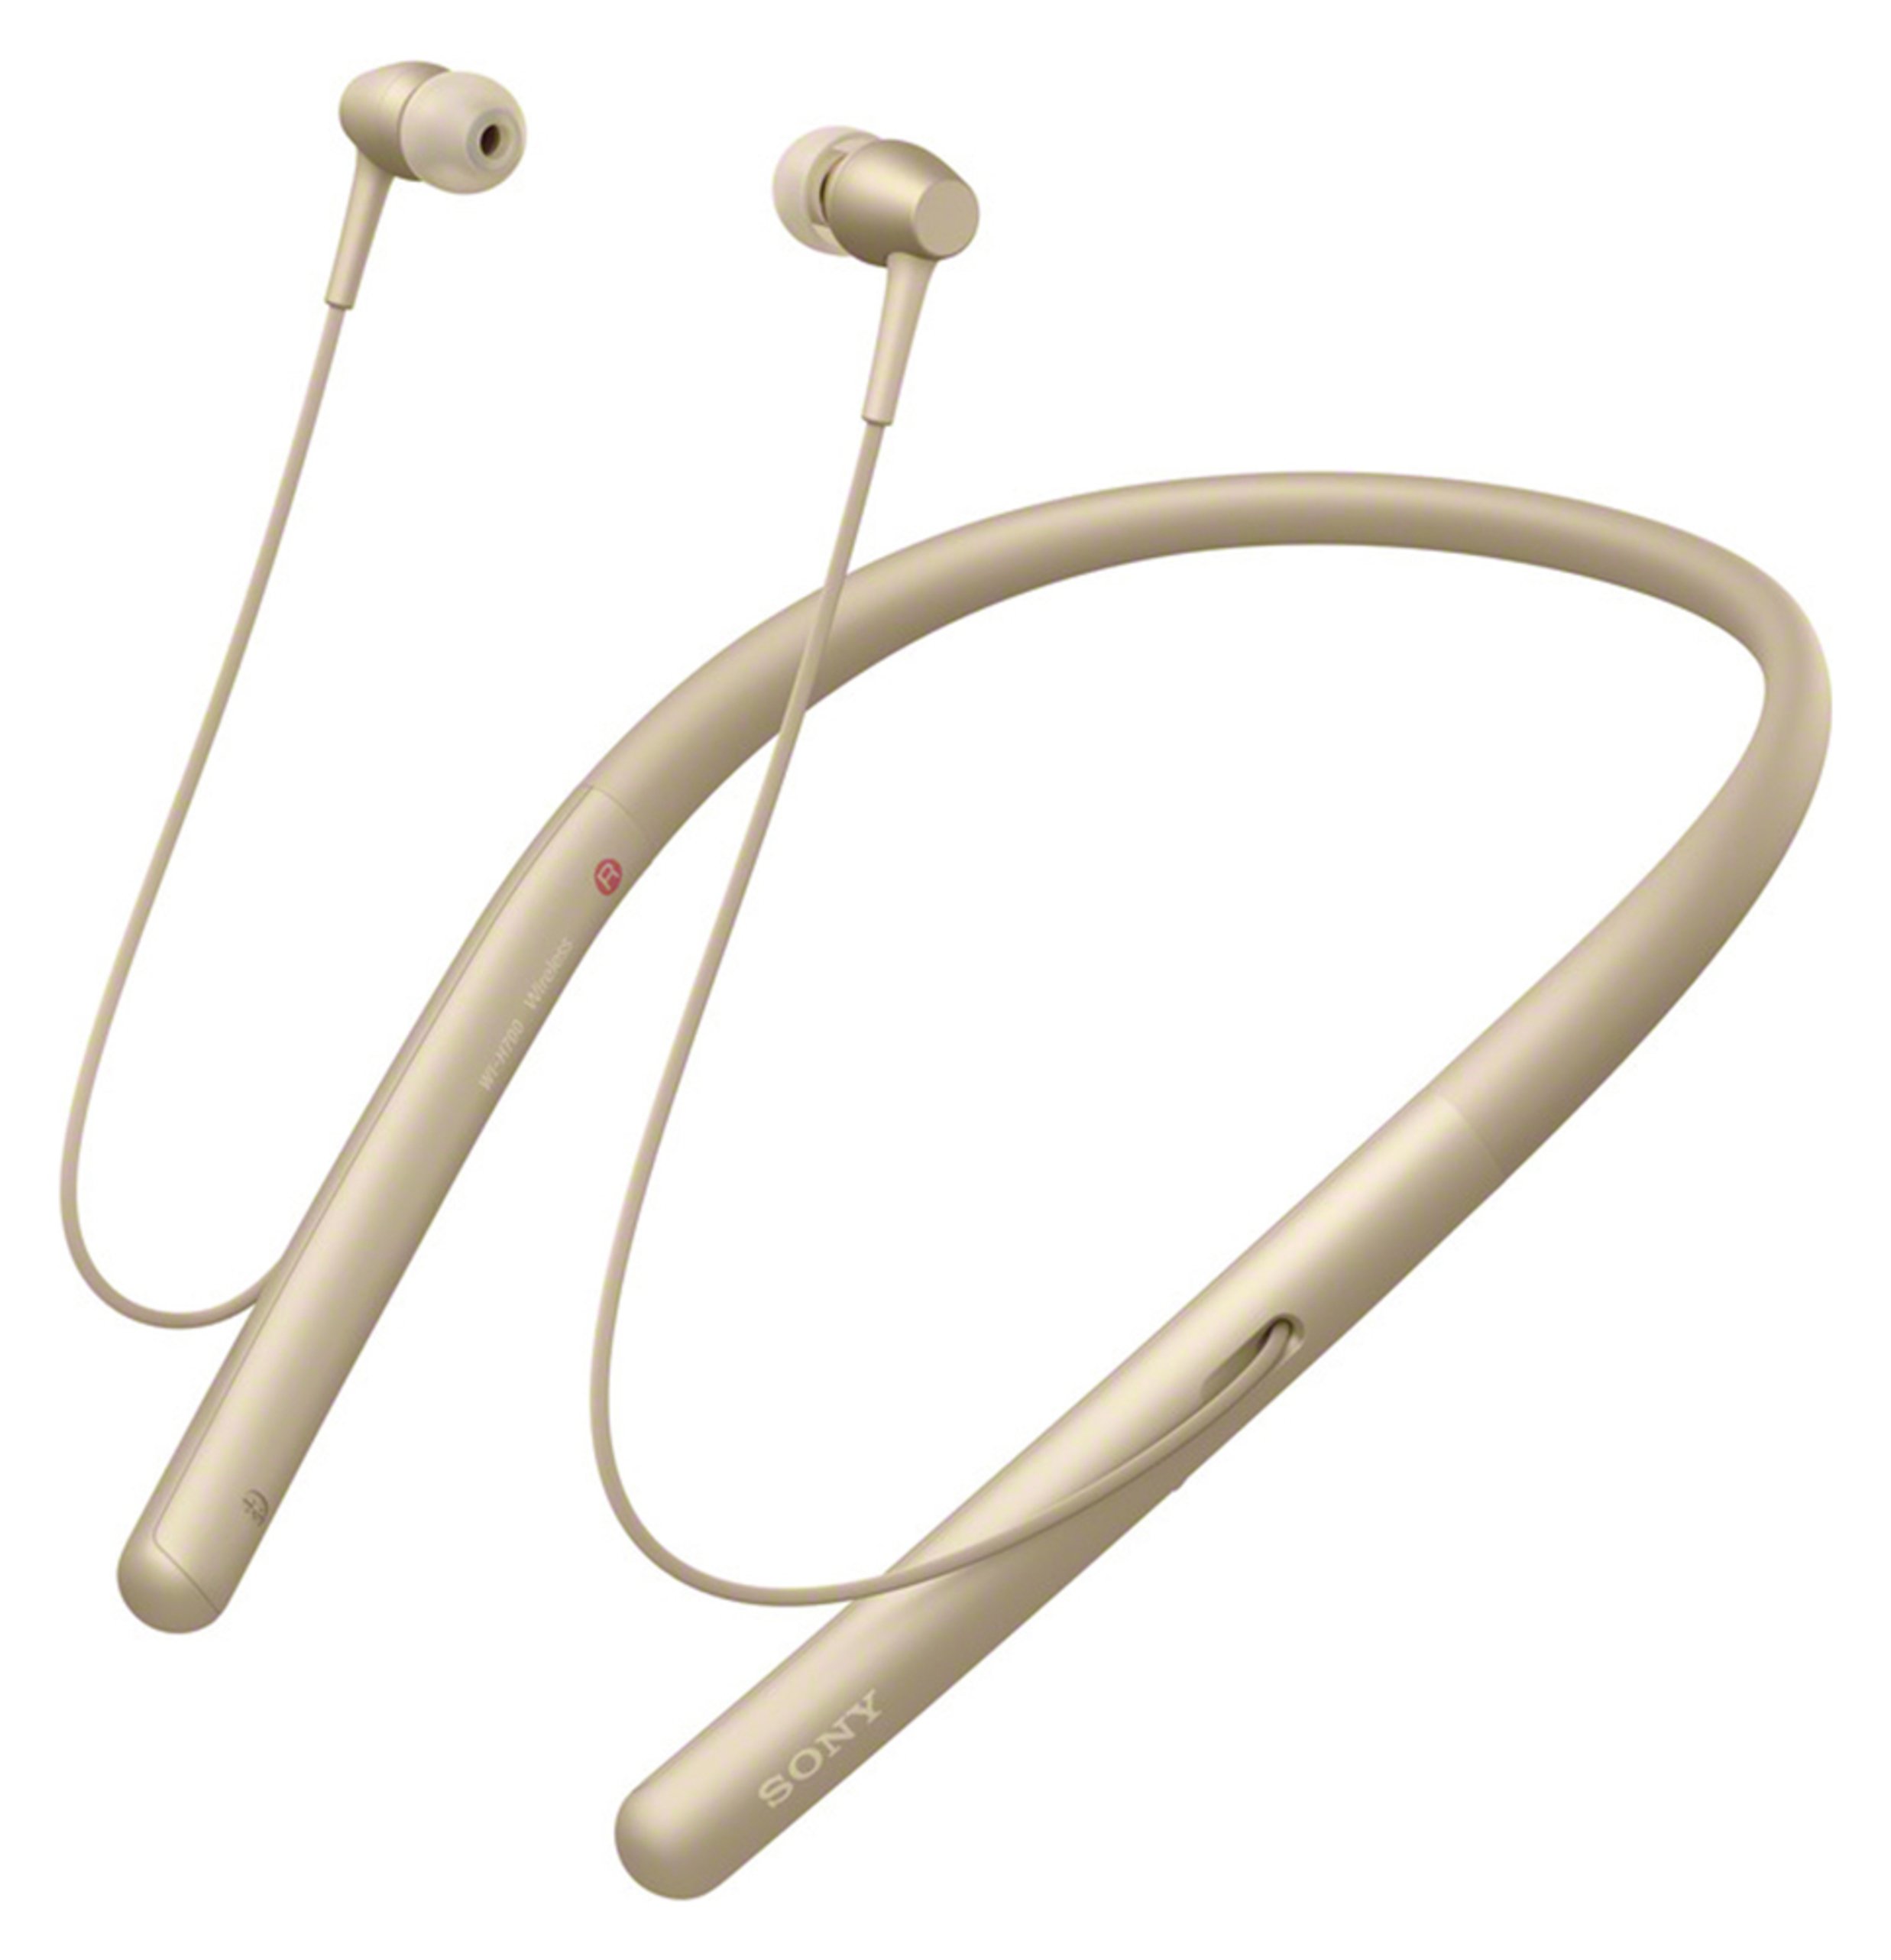 Sony H.ear WI-H700 Neckband Wireless Headphones - Gold Review